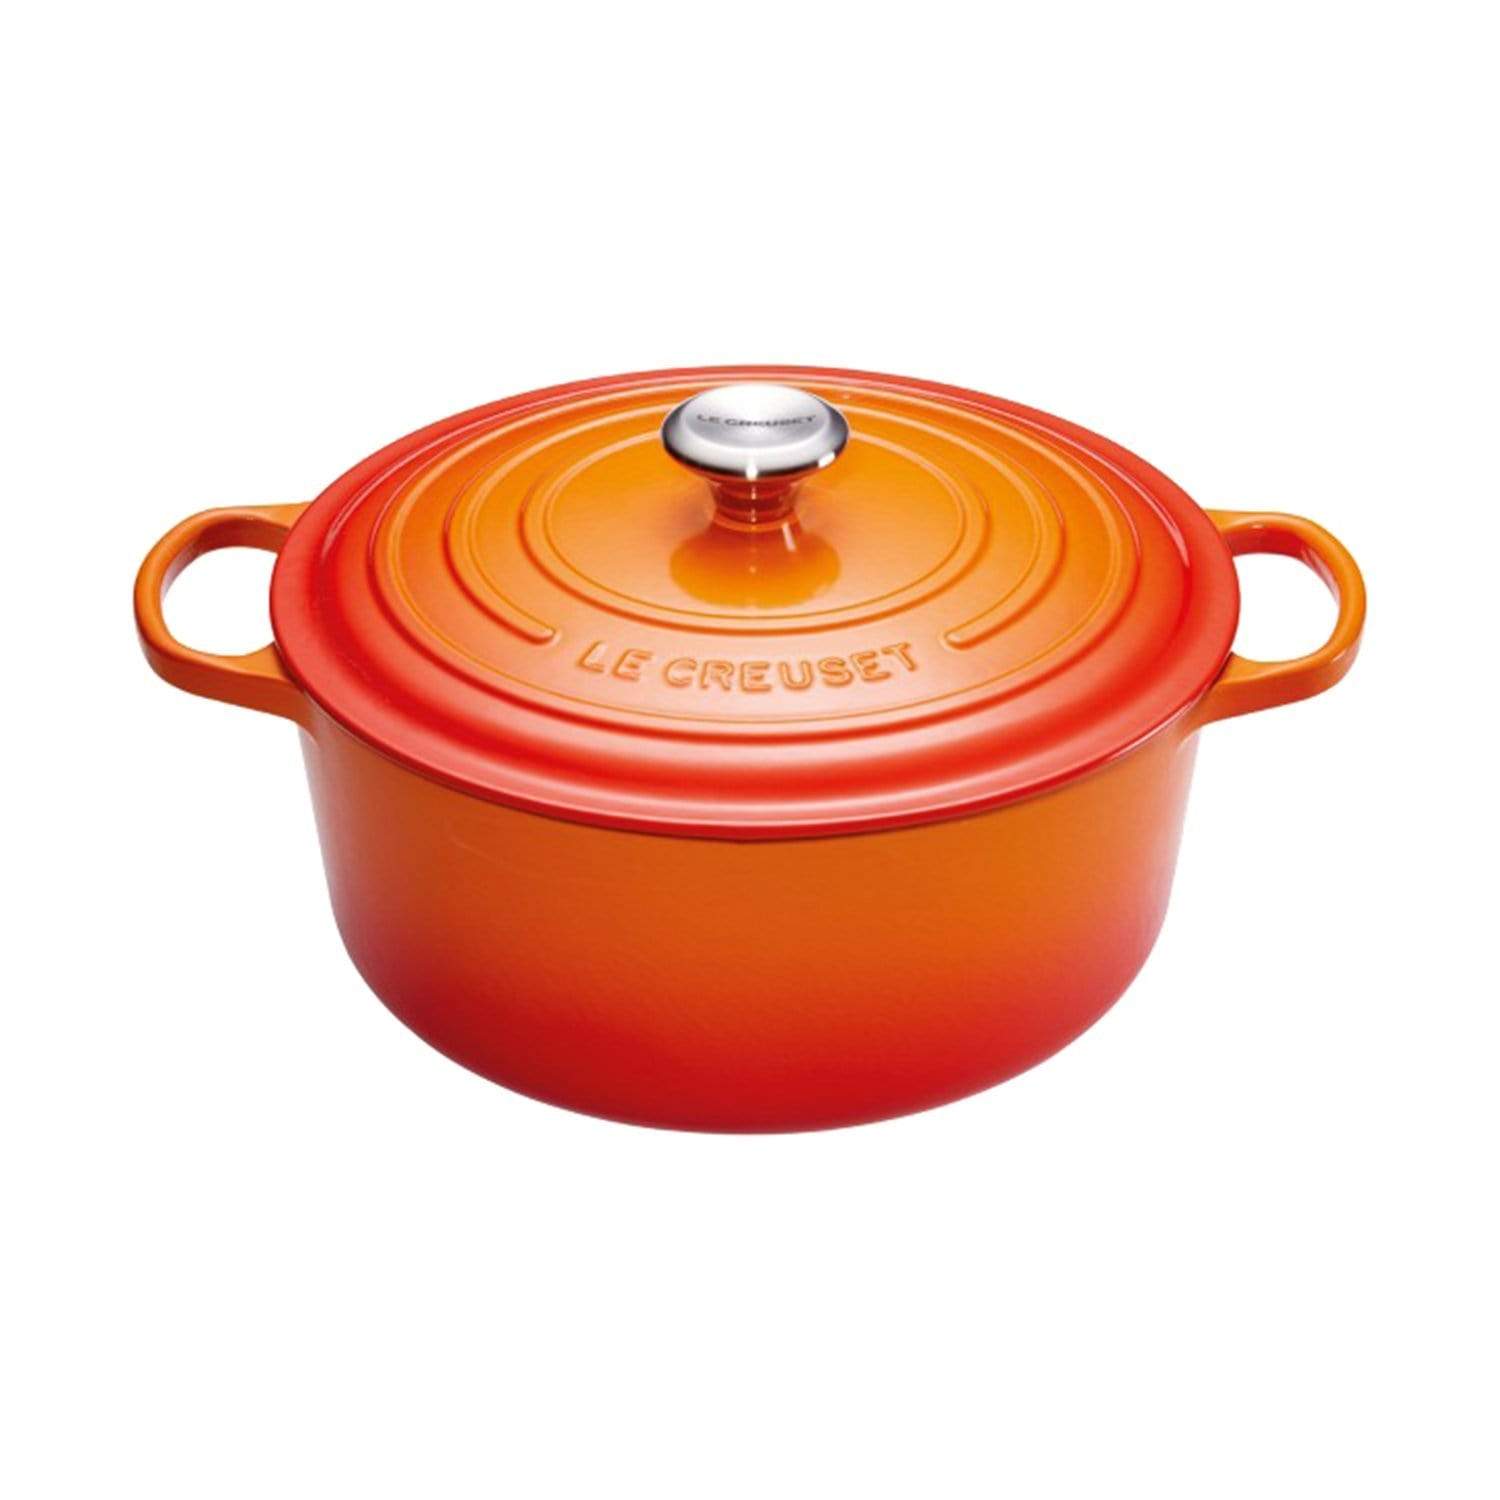 Le Creuset Round French Oven Casserole - Flame, 28 cm - 21177280902430 - Jashanmal Home